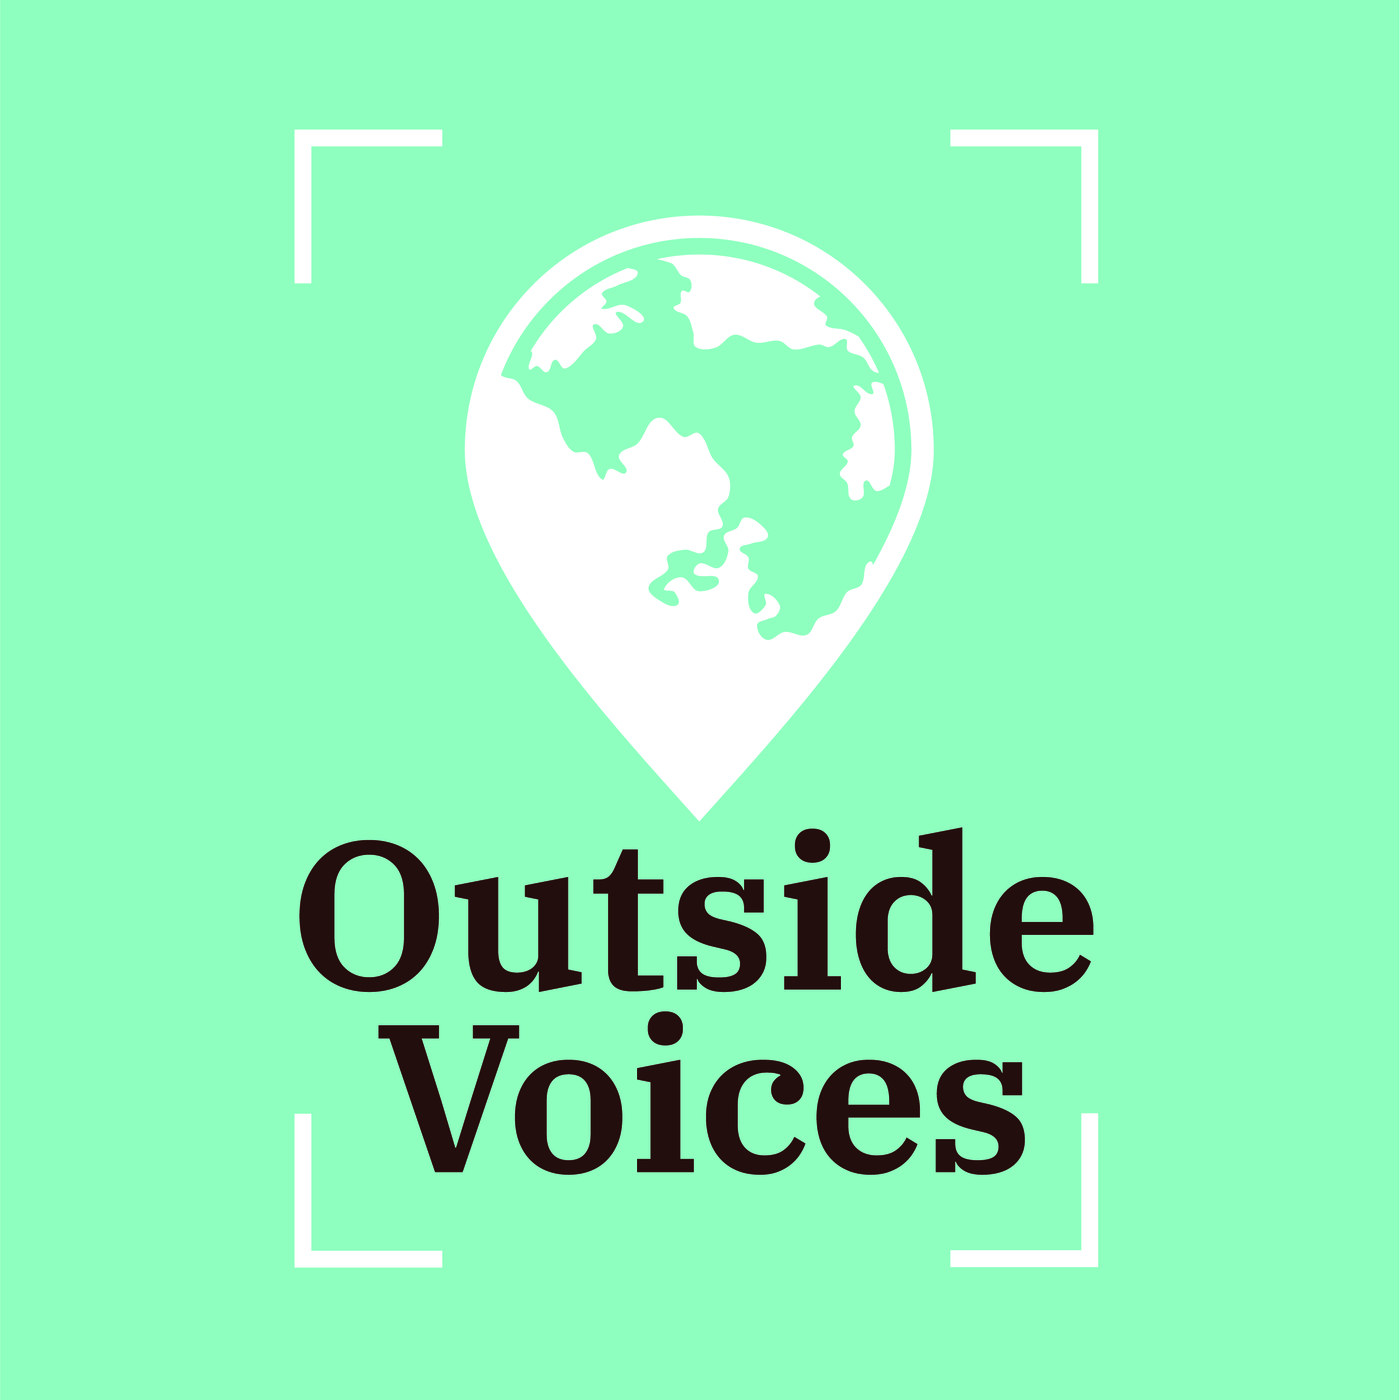 OutsideVoices with Mark Bidwell